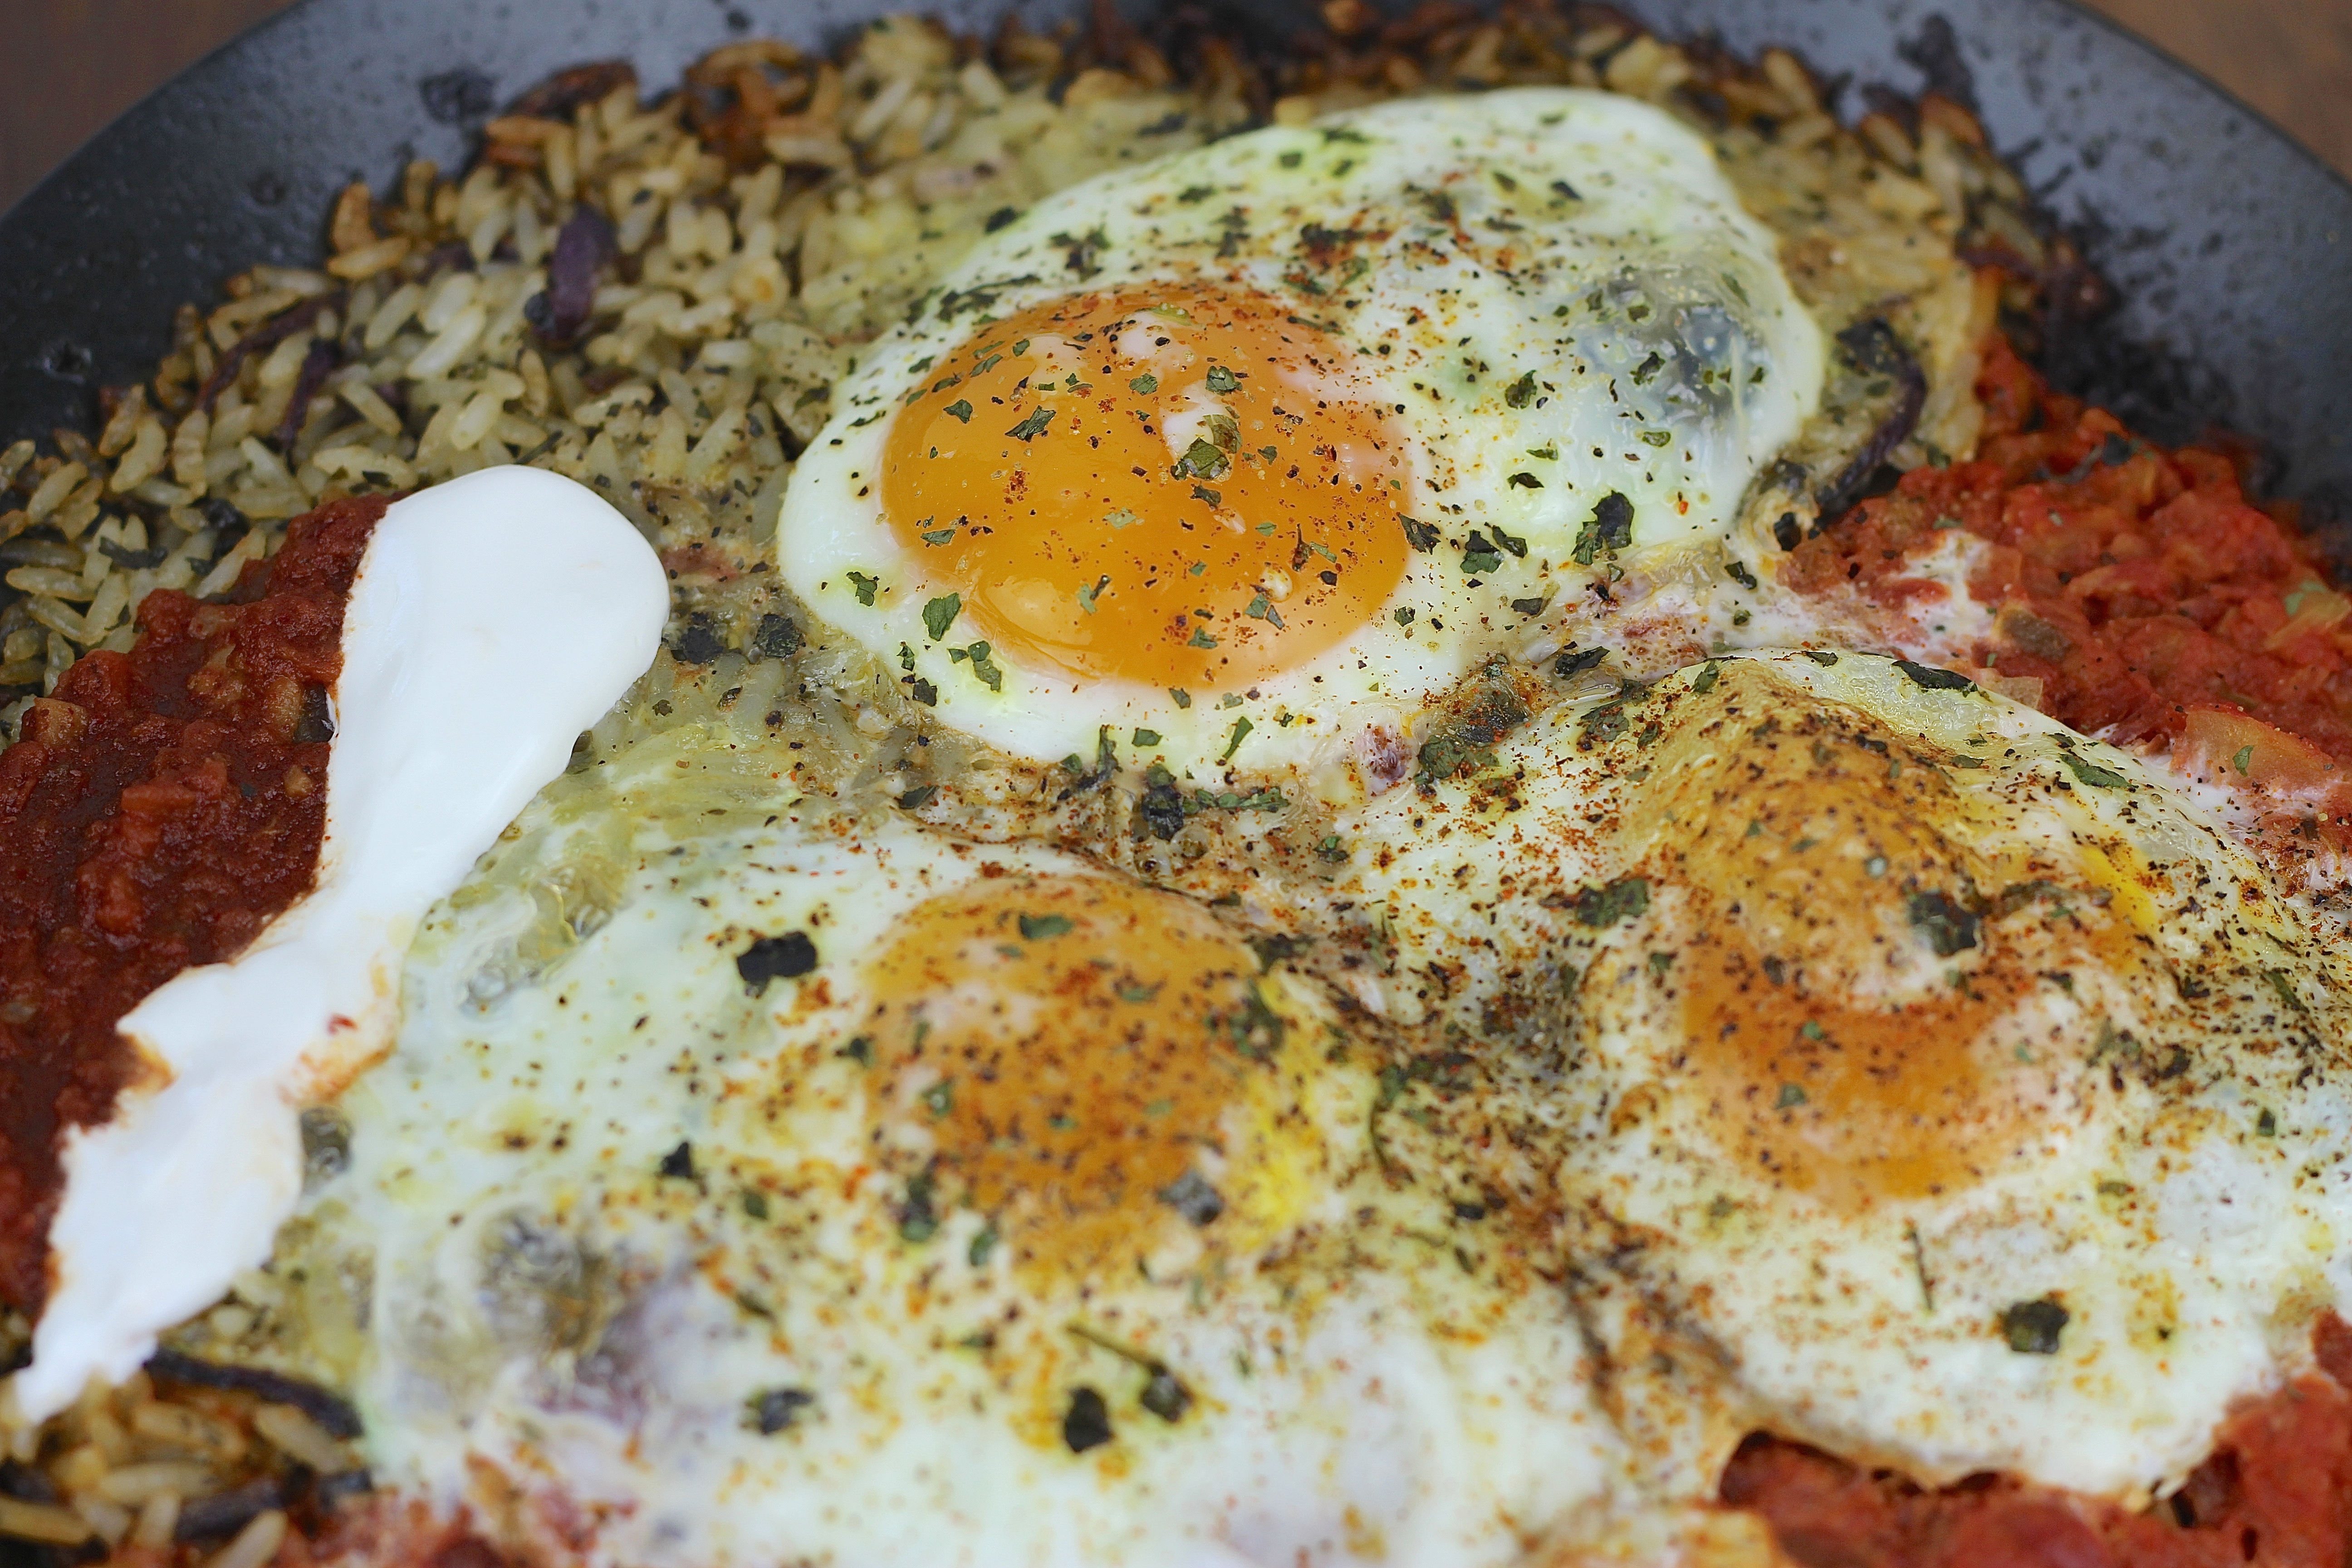 Ad Huevos Rancheros over Rice #ShopRiceland - up close (c)nwafoodie